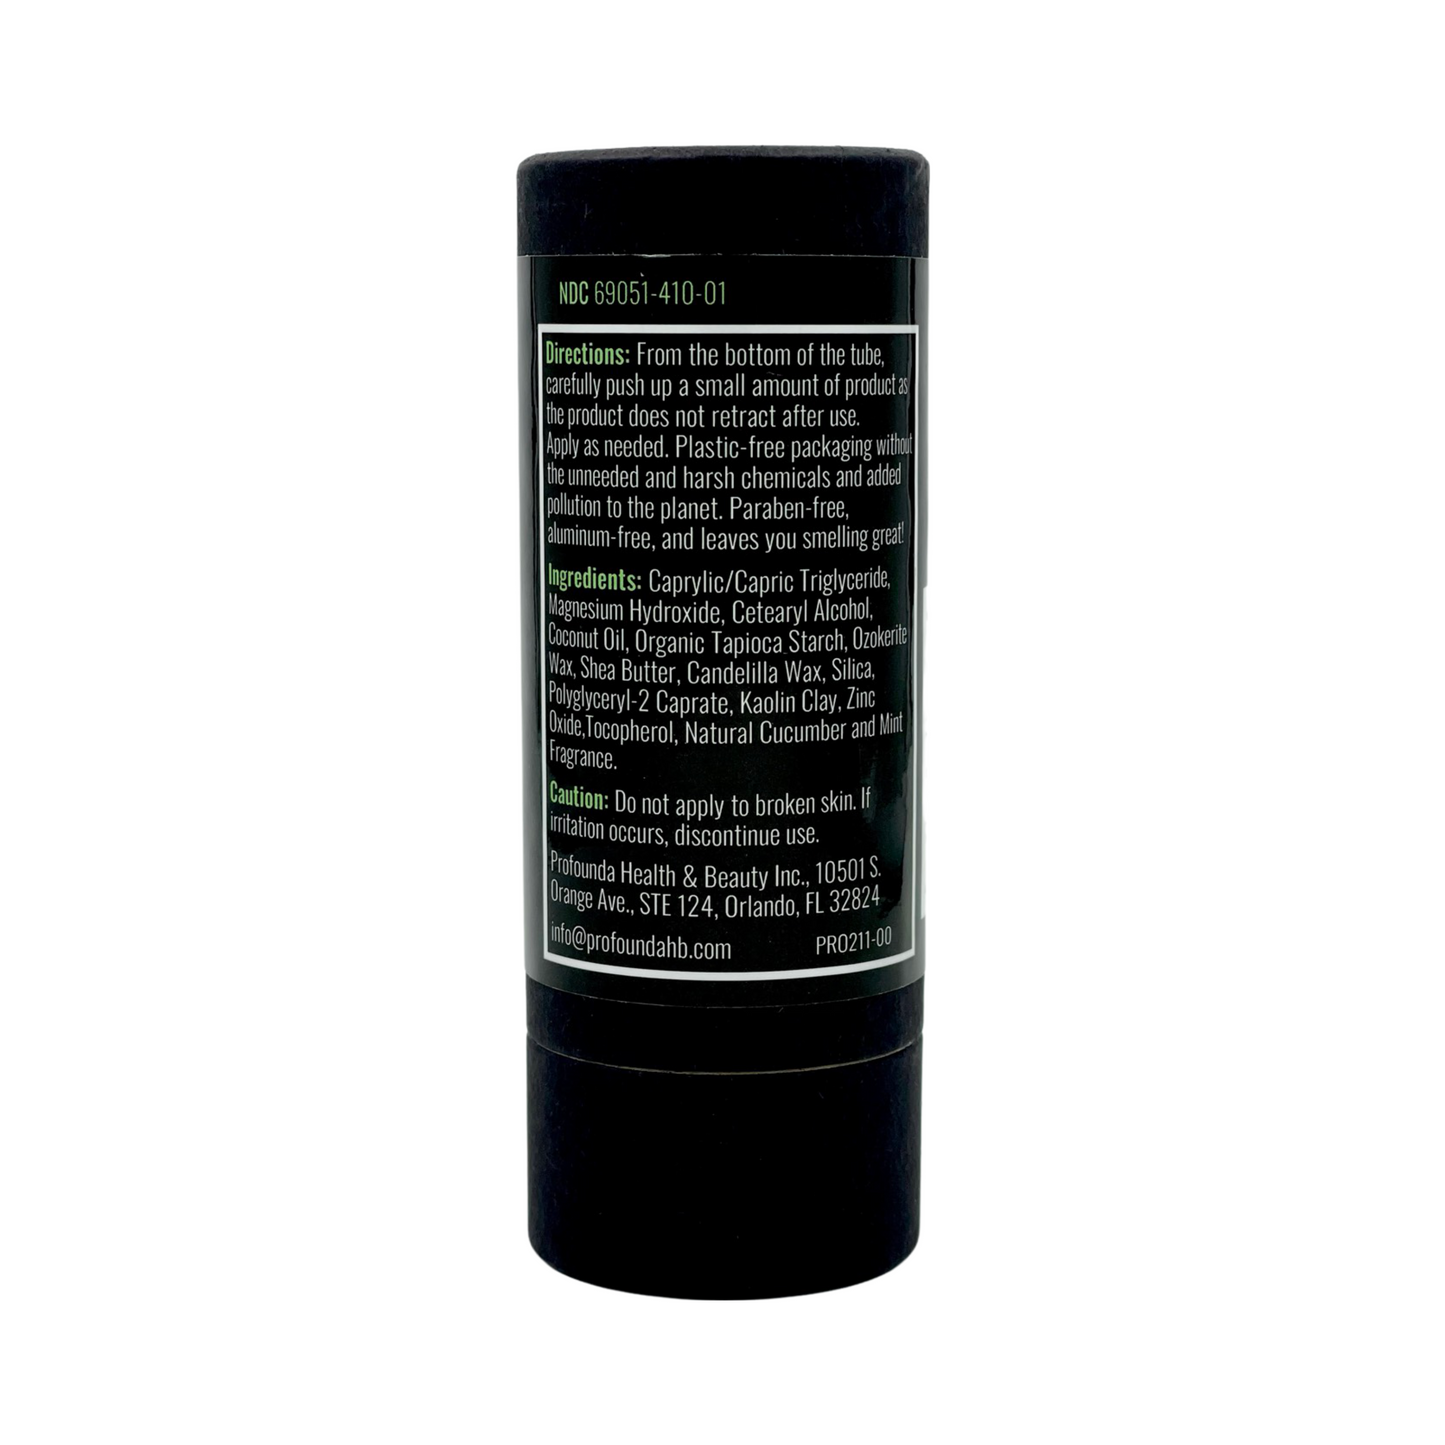 Cucumber & Mint Deodorant - All Natural Deodorant for Men and Women -Paraben Free, Aluminum Free, Cruelty Free, Plastic Free - with coconut oil and Shea butter